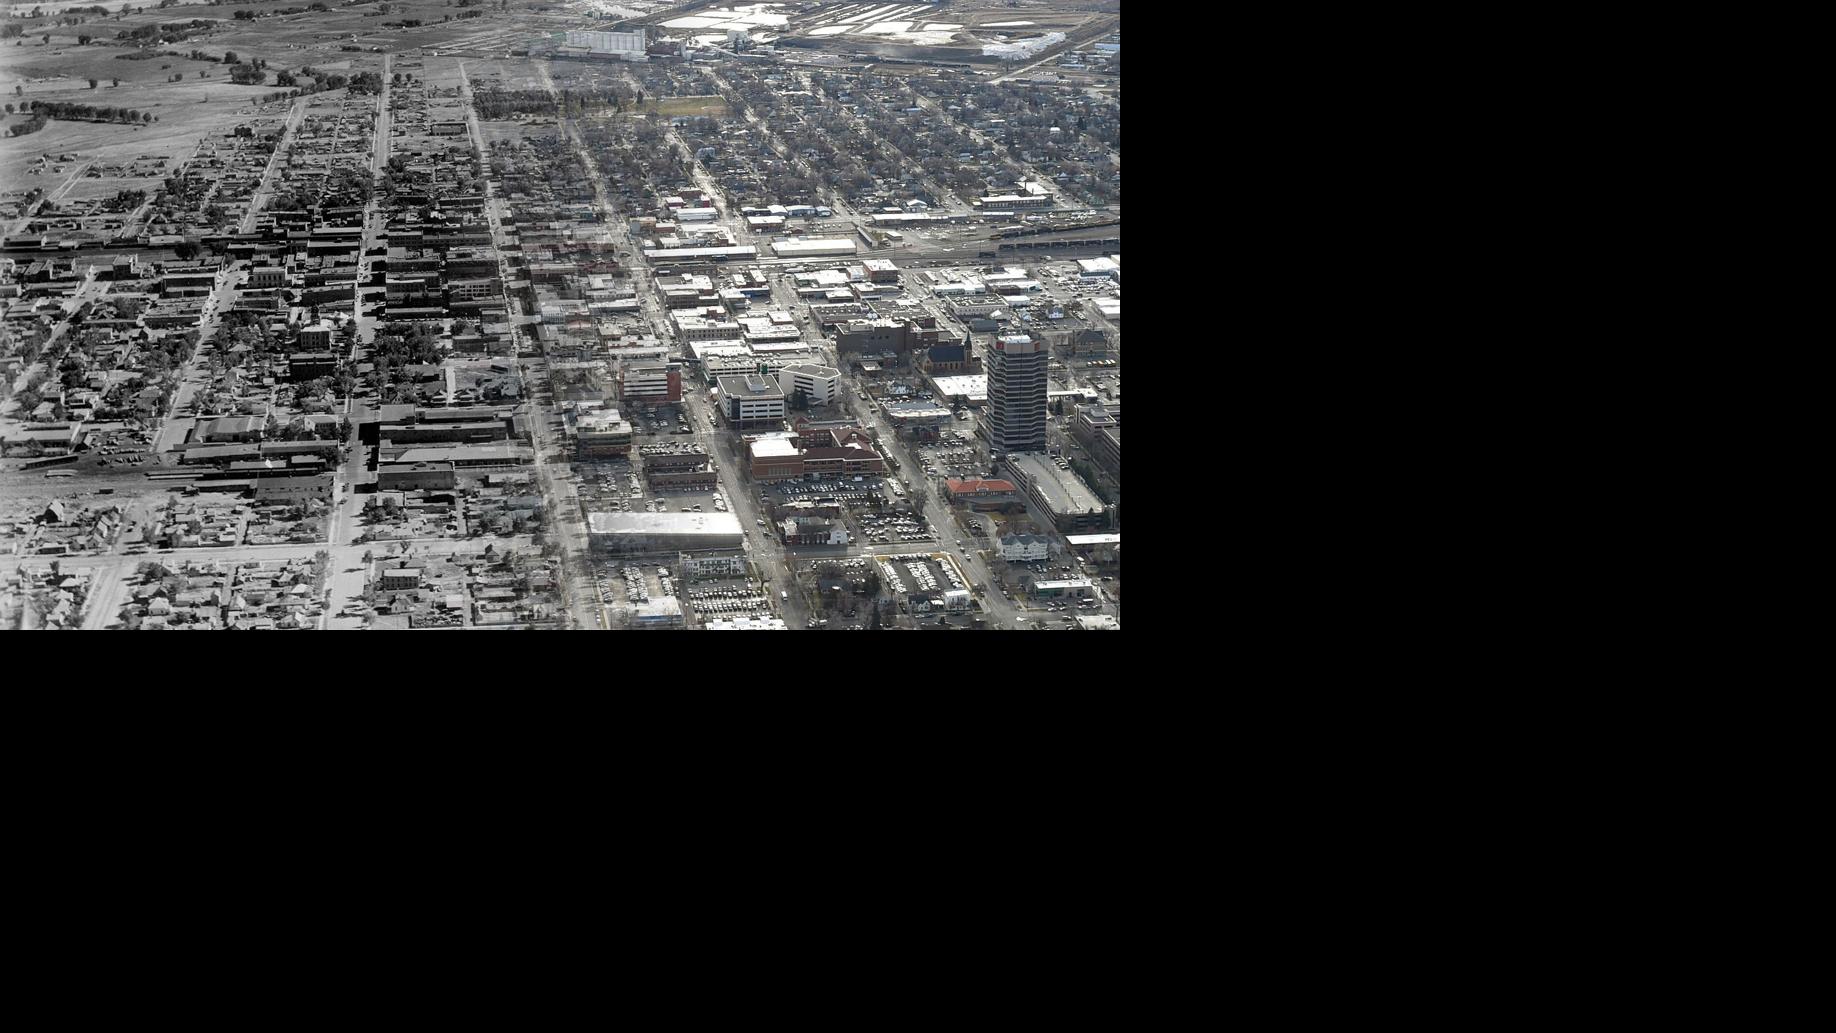 Fly by history: Aerial photos show decades of growth in Billings